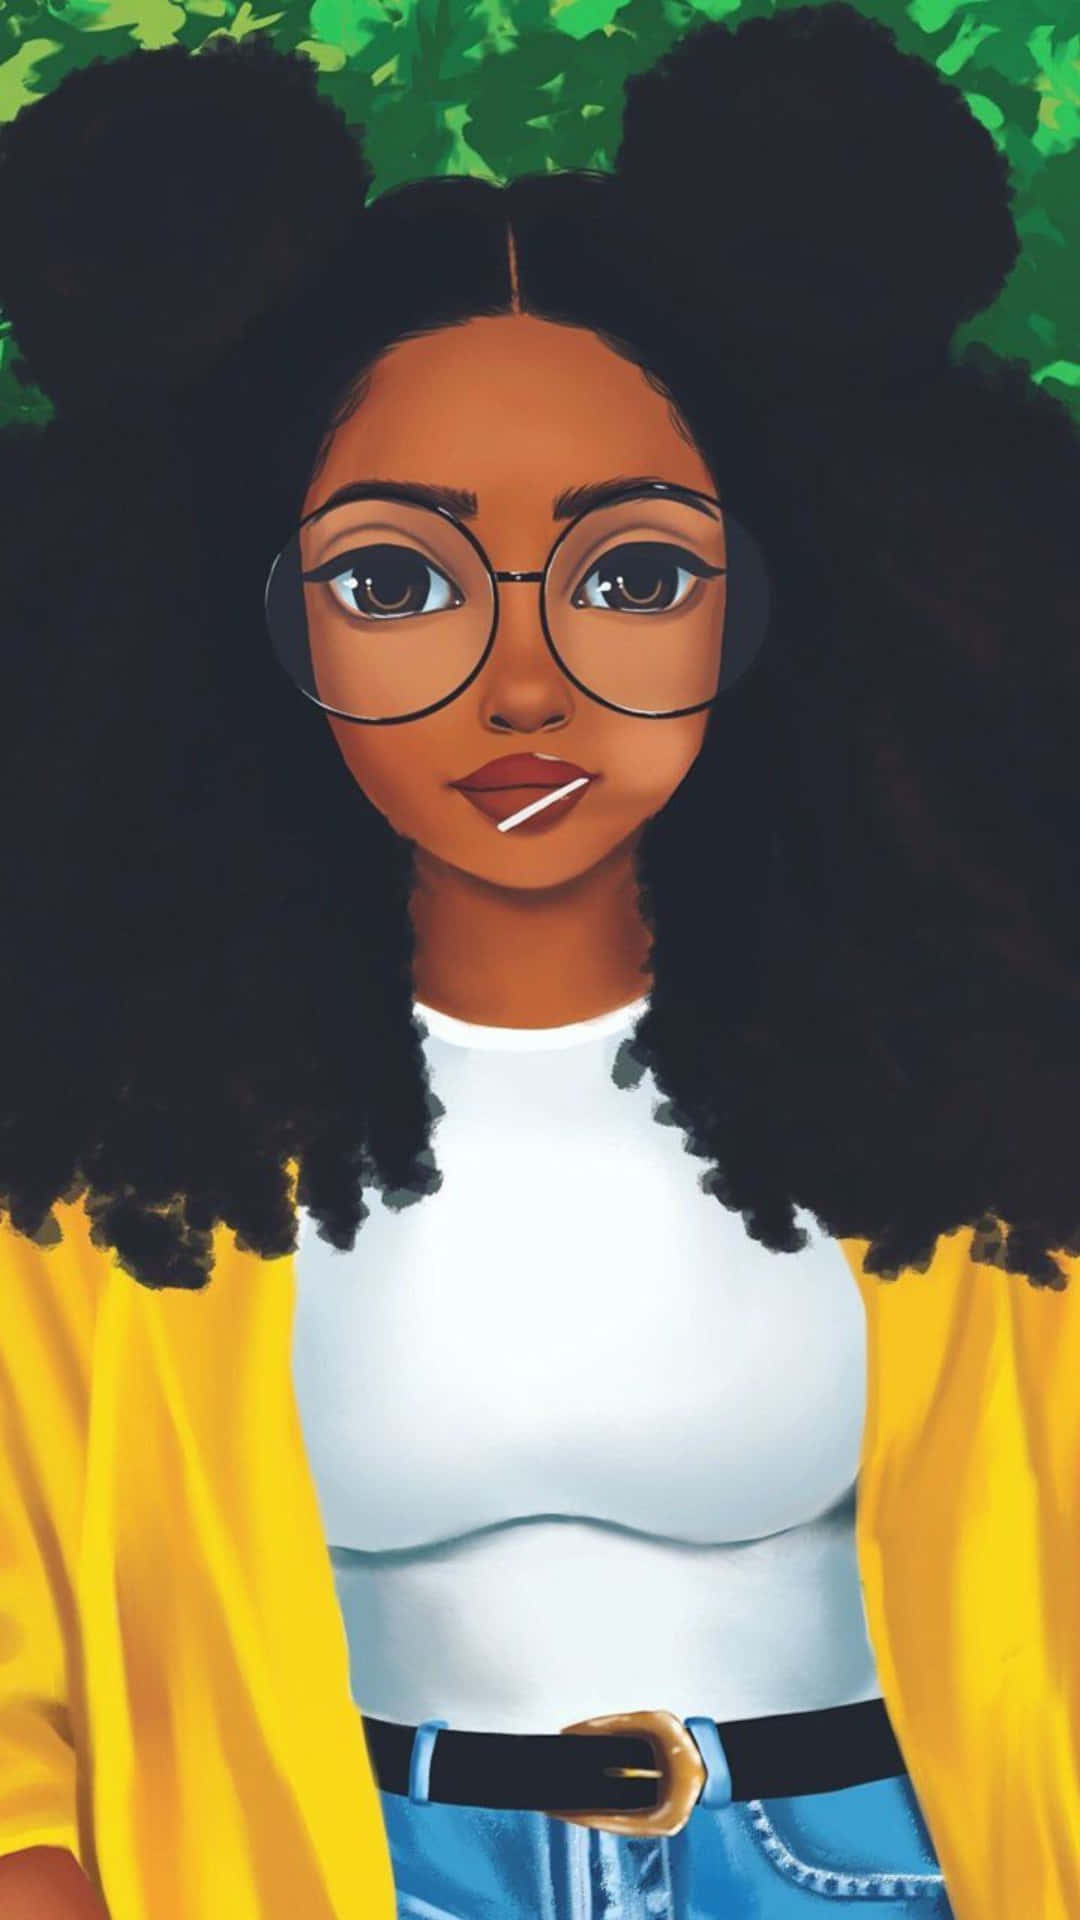 Animated Black Girl With Glasses Wallpaper